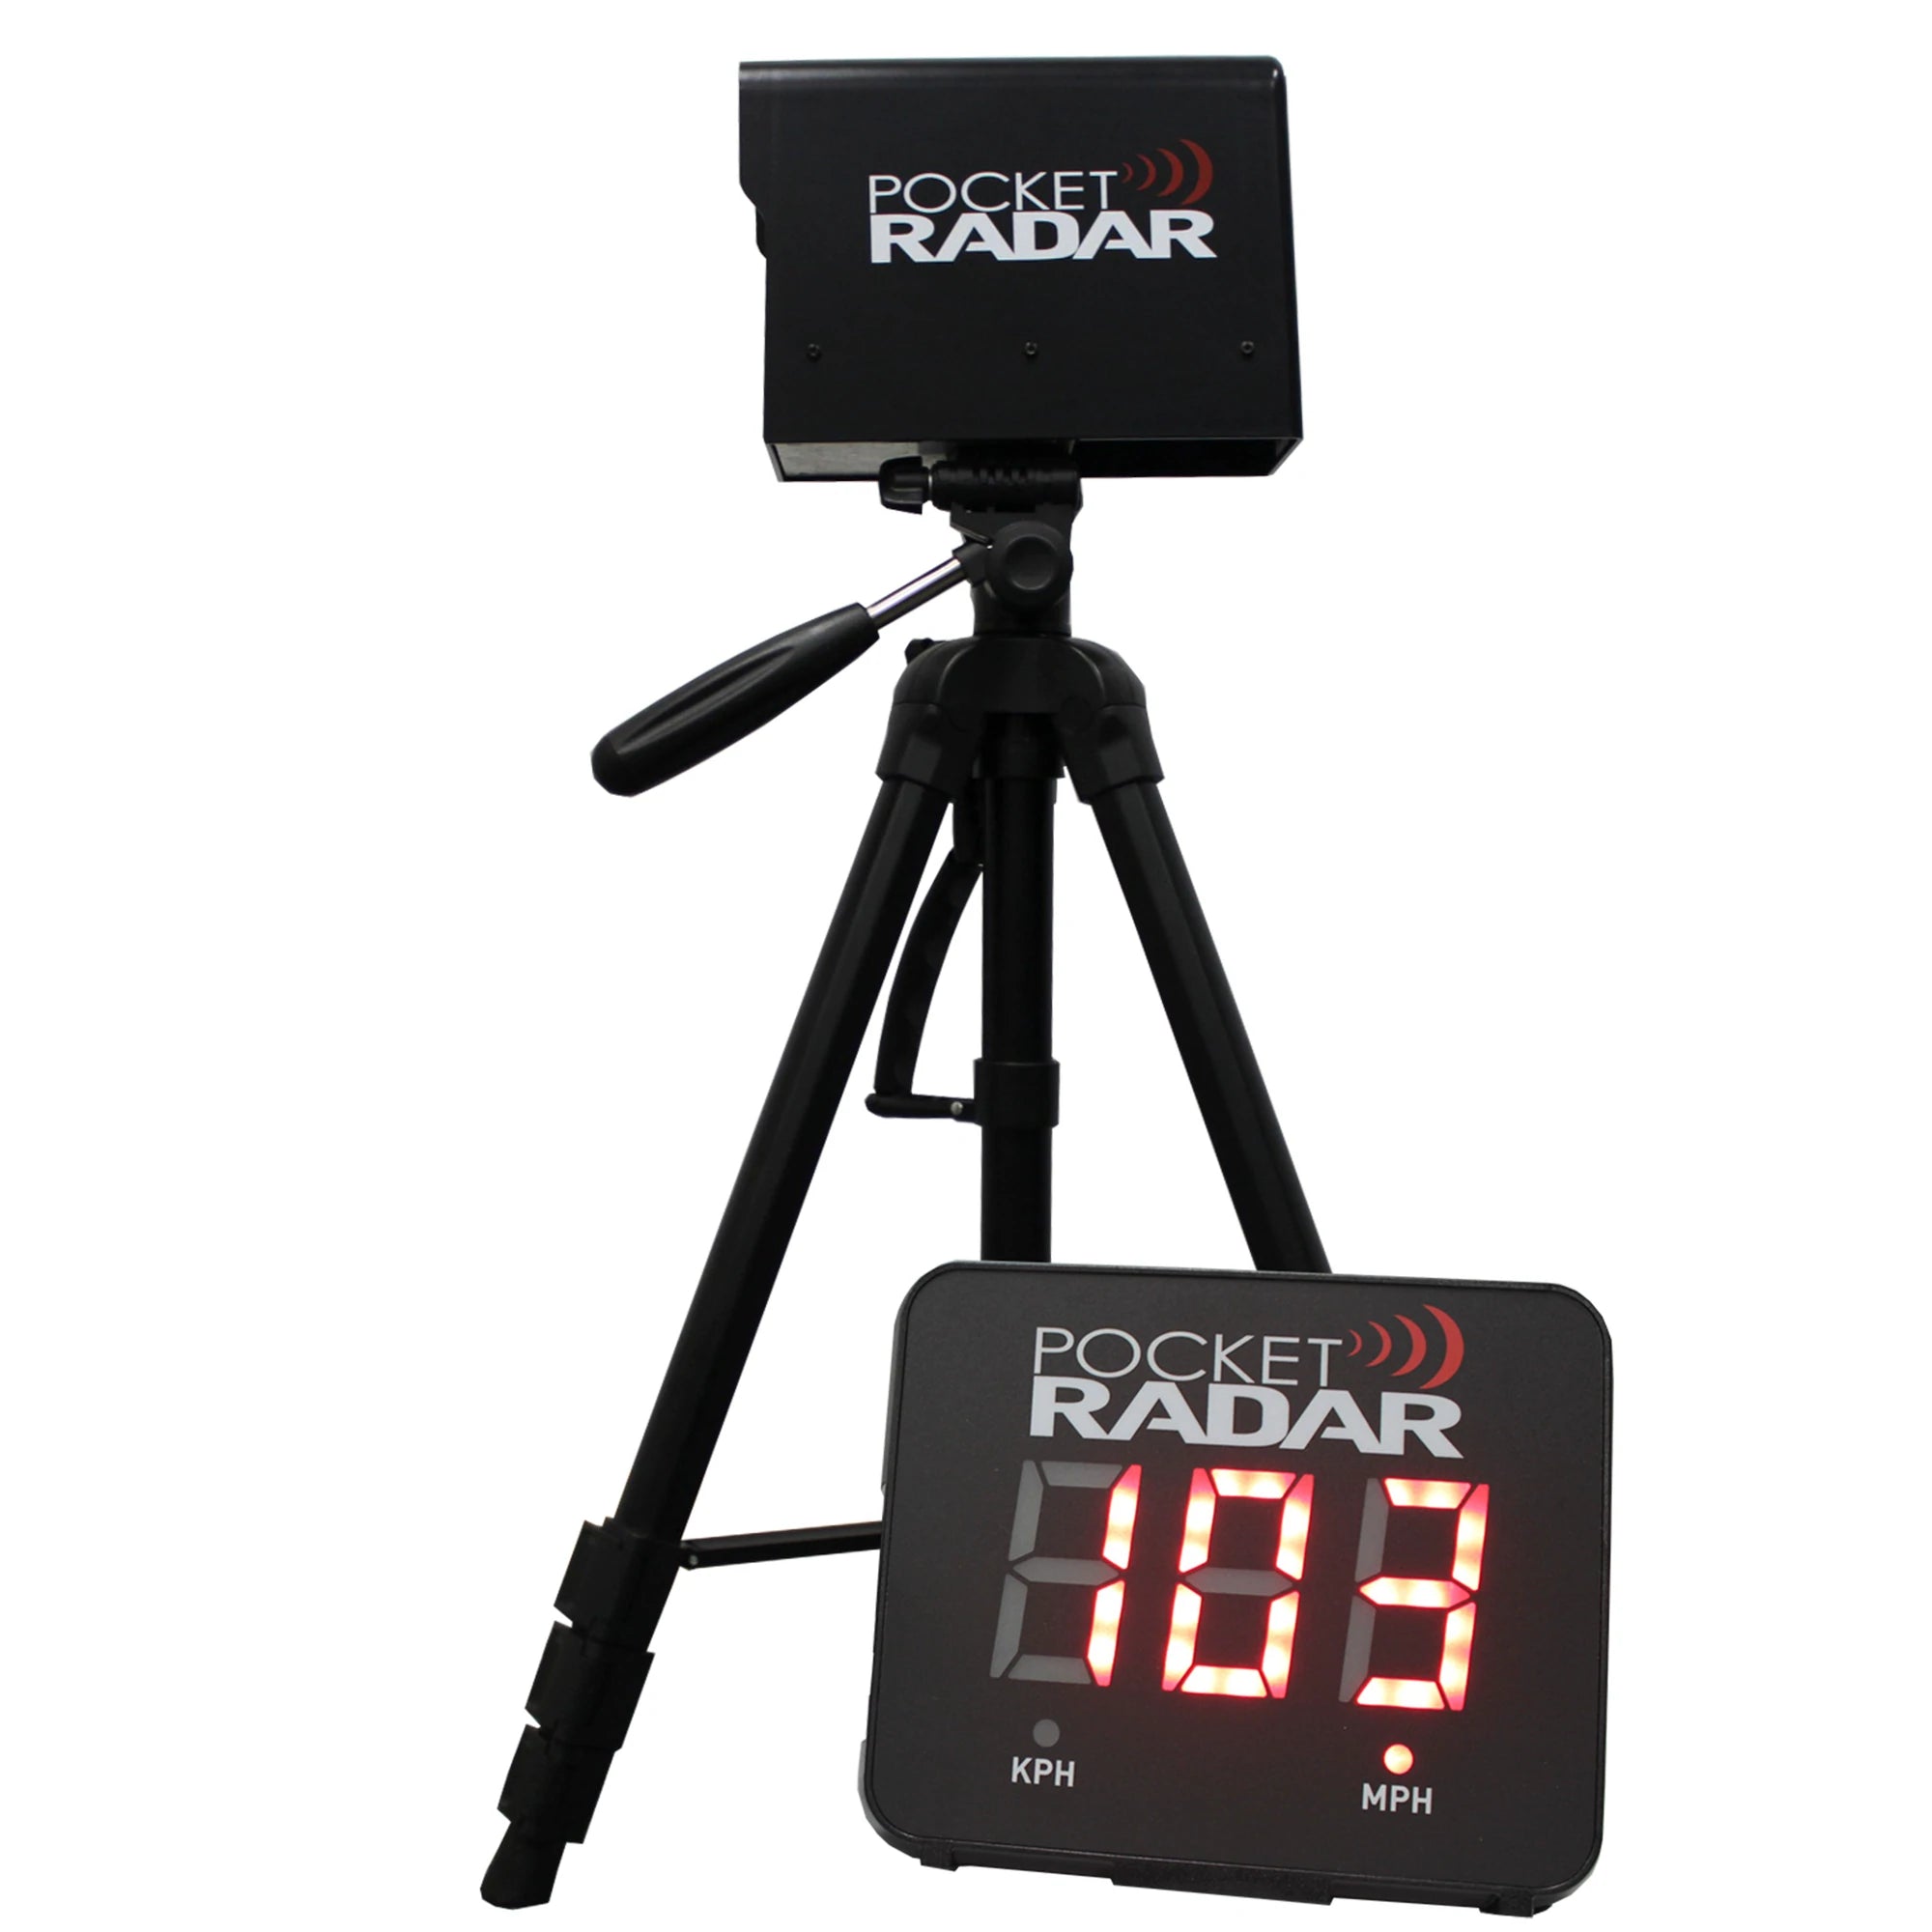 Deluxe Tripod with Screen and Pocket Radar